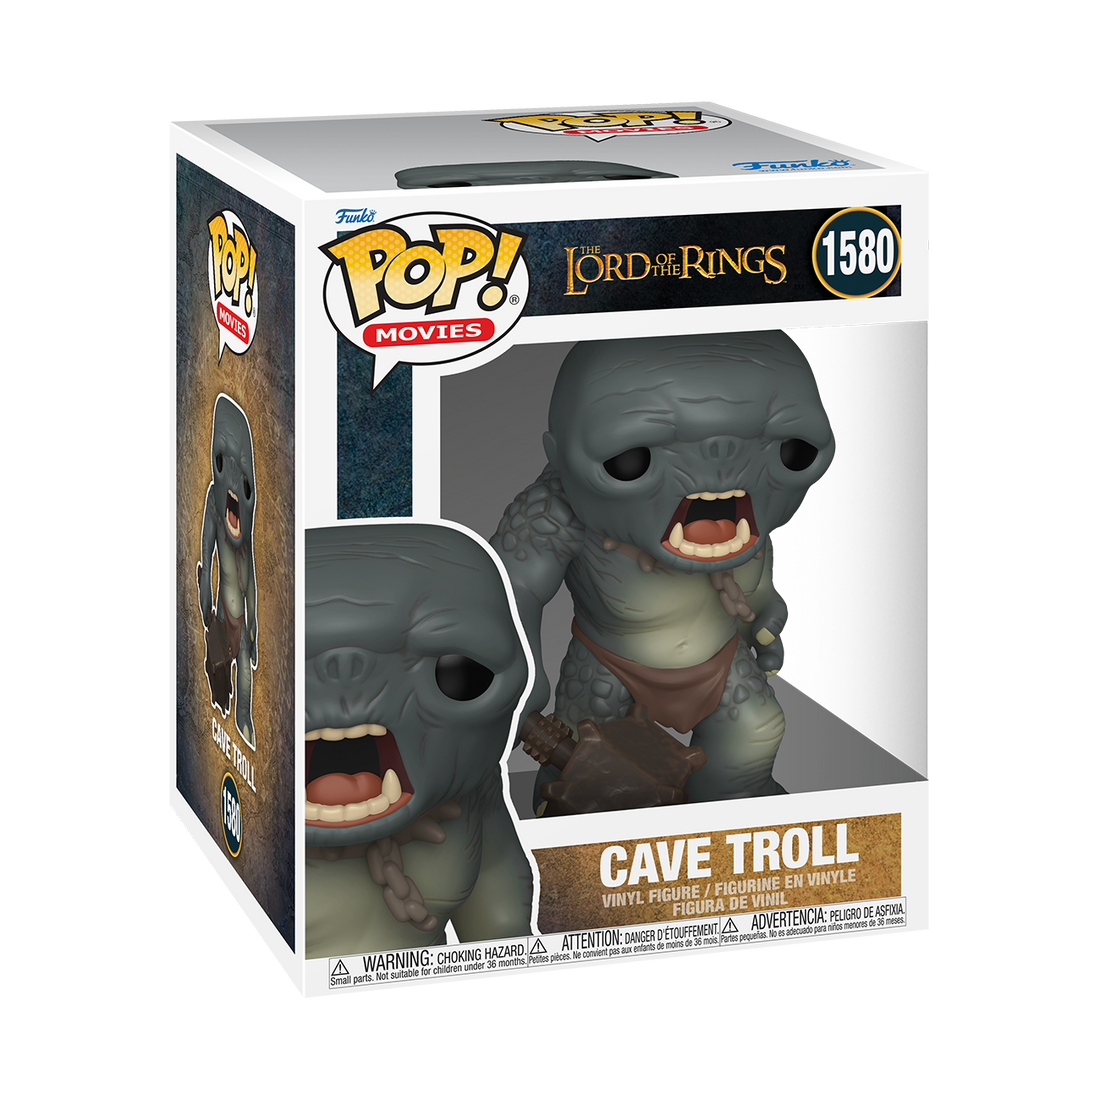 Funko Pop! Super Sized Movies Lord Of The Rings 1580 Cave Troll Funko